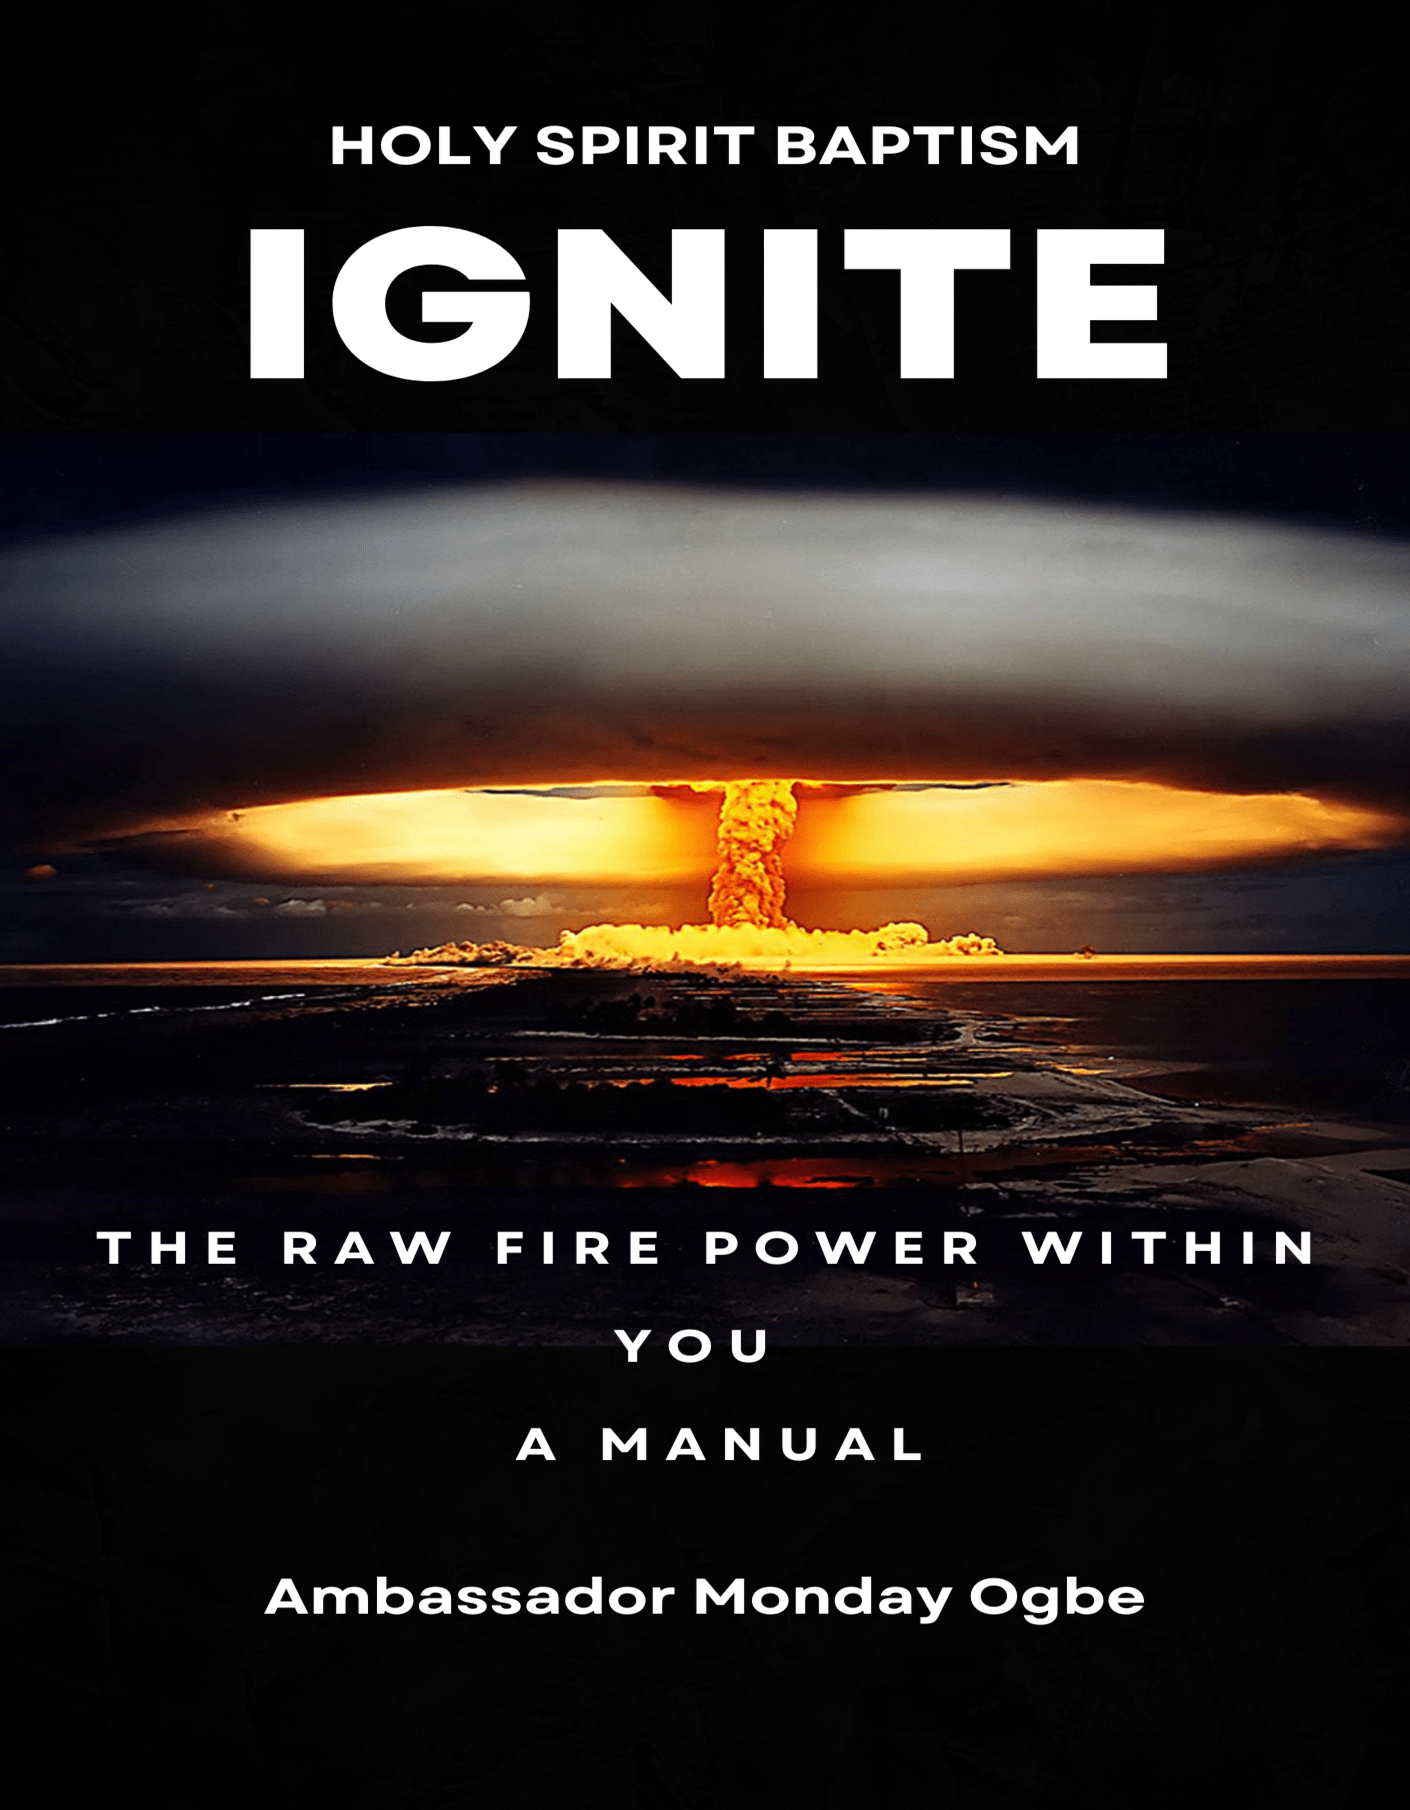 New Book Release - Ignite the Raw Fire Power Within You – The Holy Spirit Baptism Manual – Paperback and Ebook